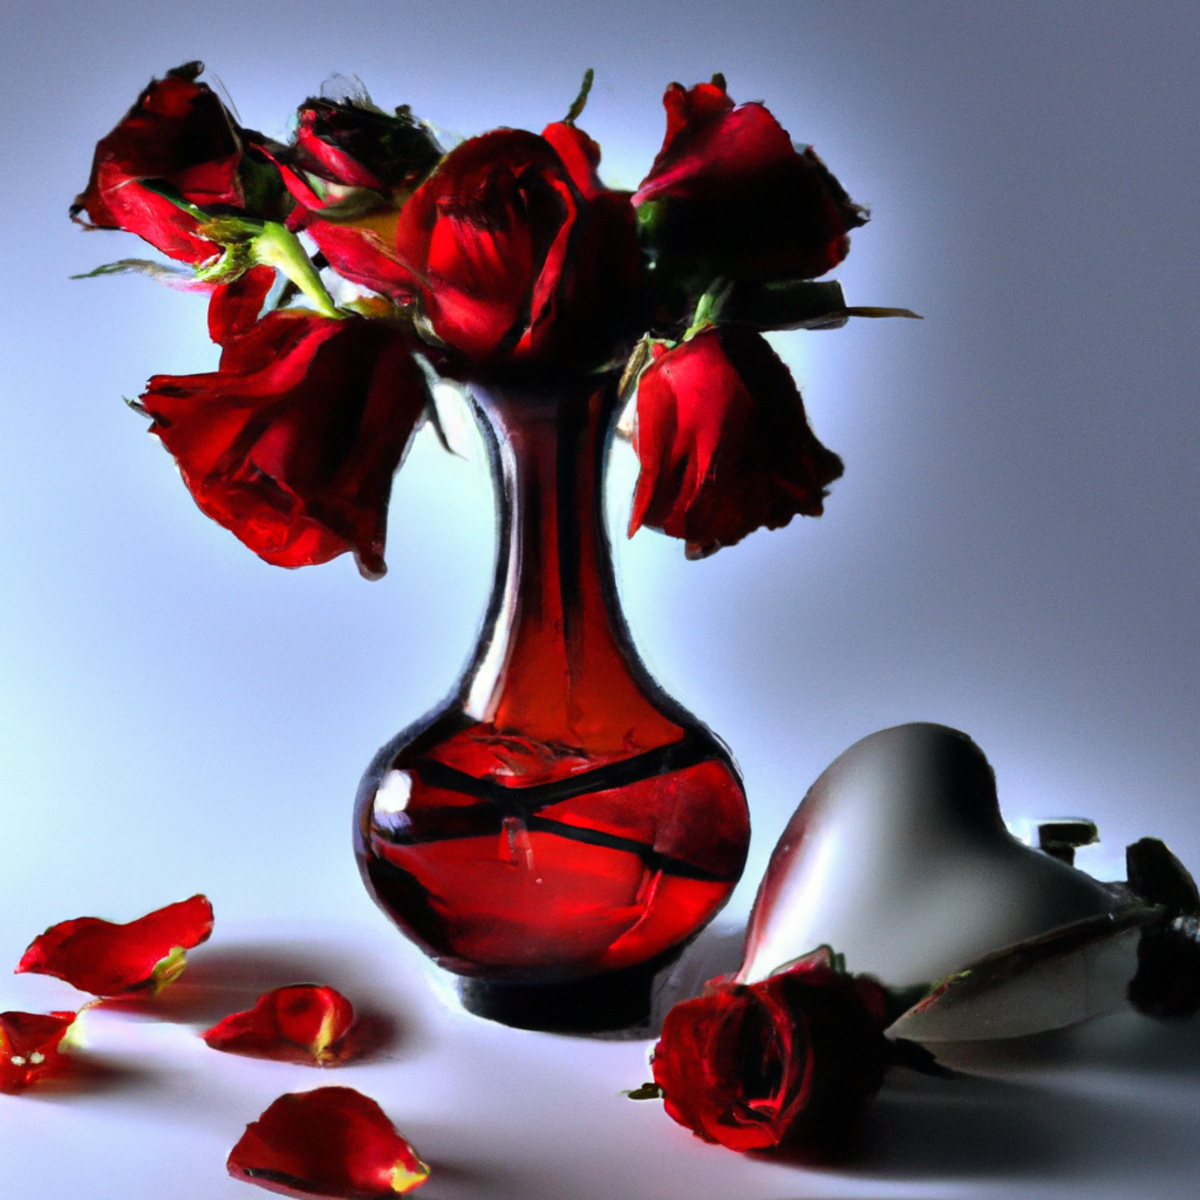 Delicate glass heart vase filled with vibrant red roses symbolizes the fragility of Broken Heart Syndrome.